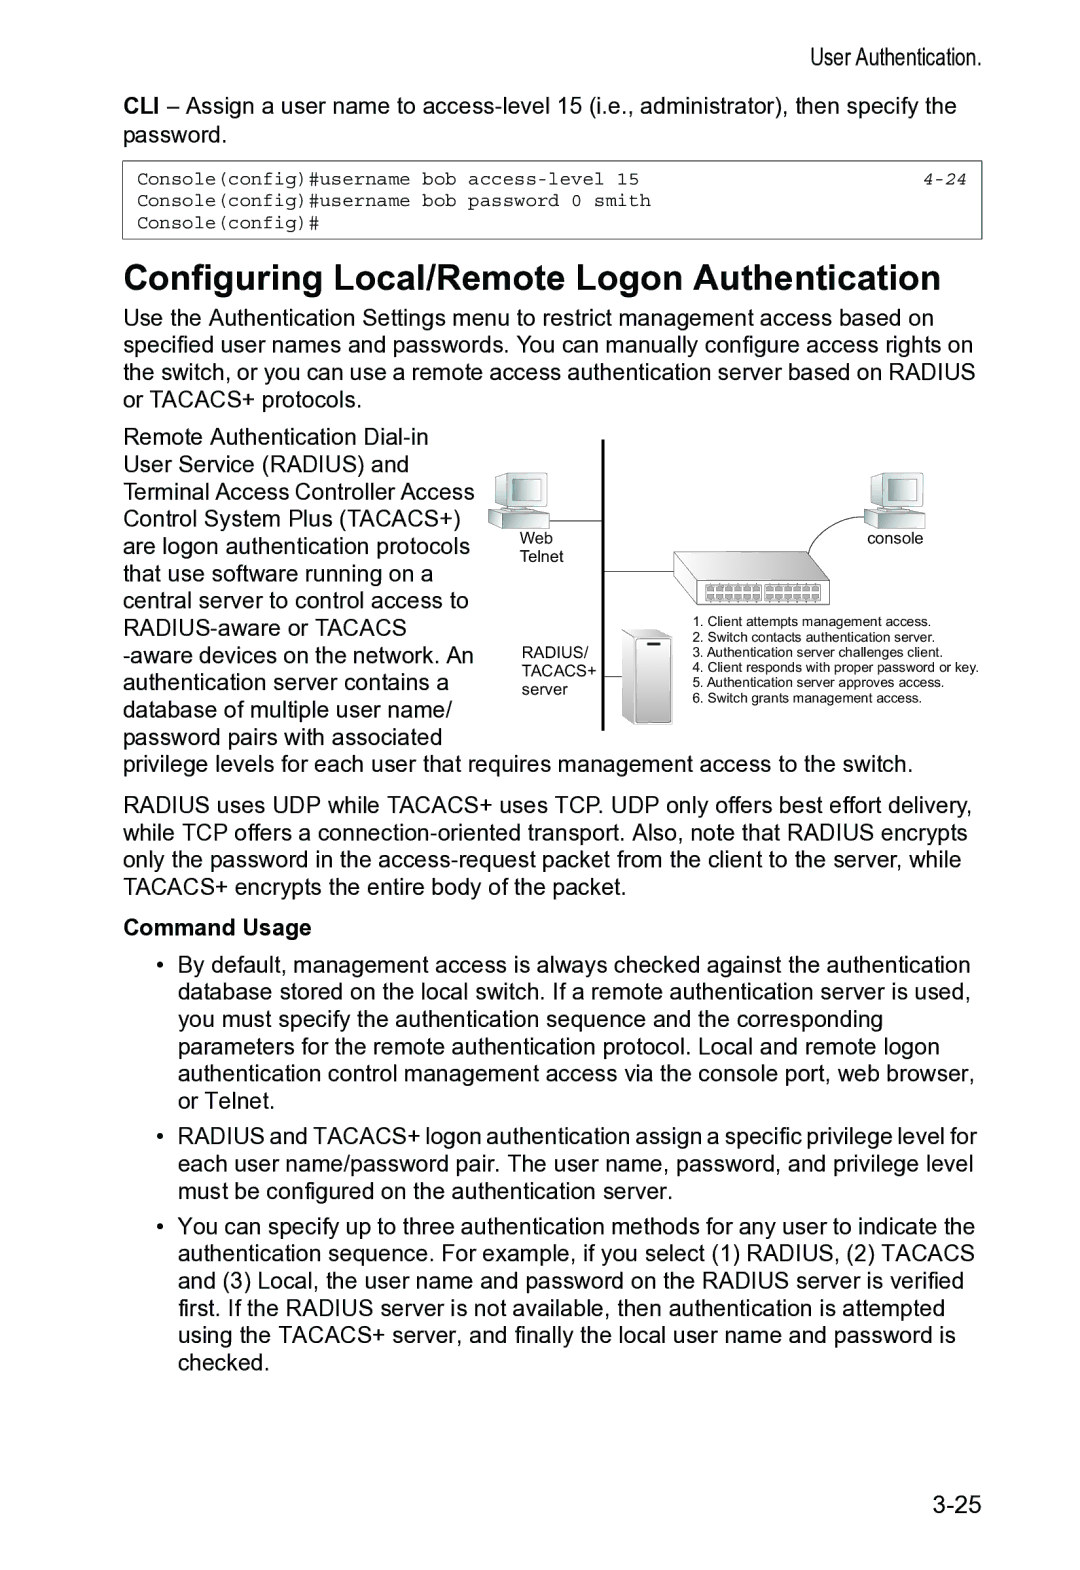 Accton Technology VS4512DC manual Configuring Local/Remote Logon Authentication 